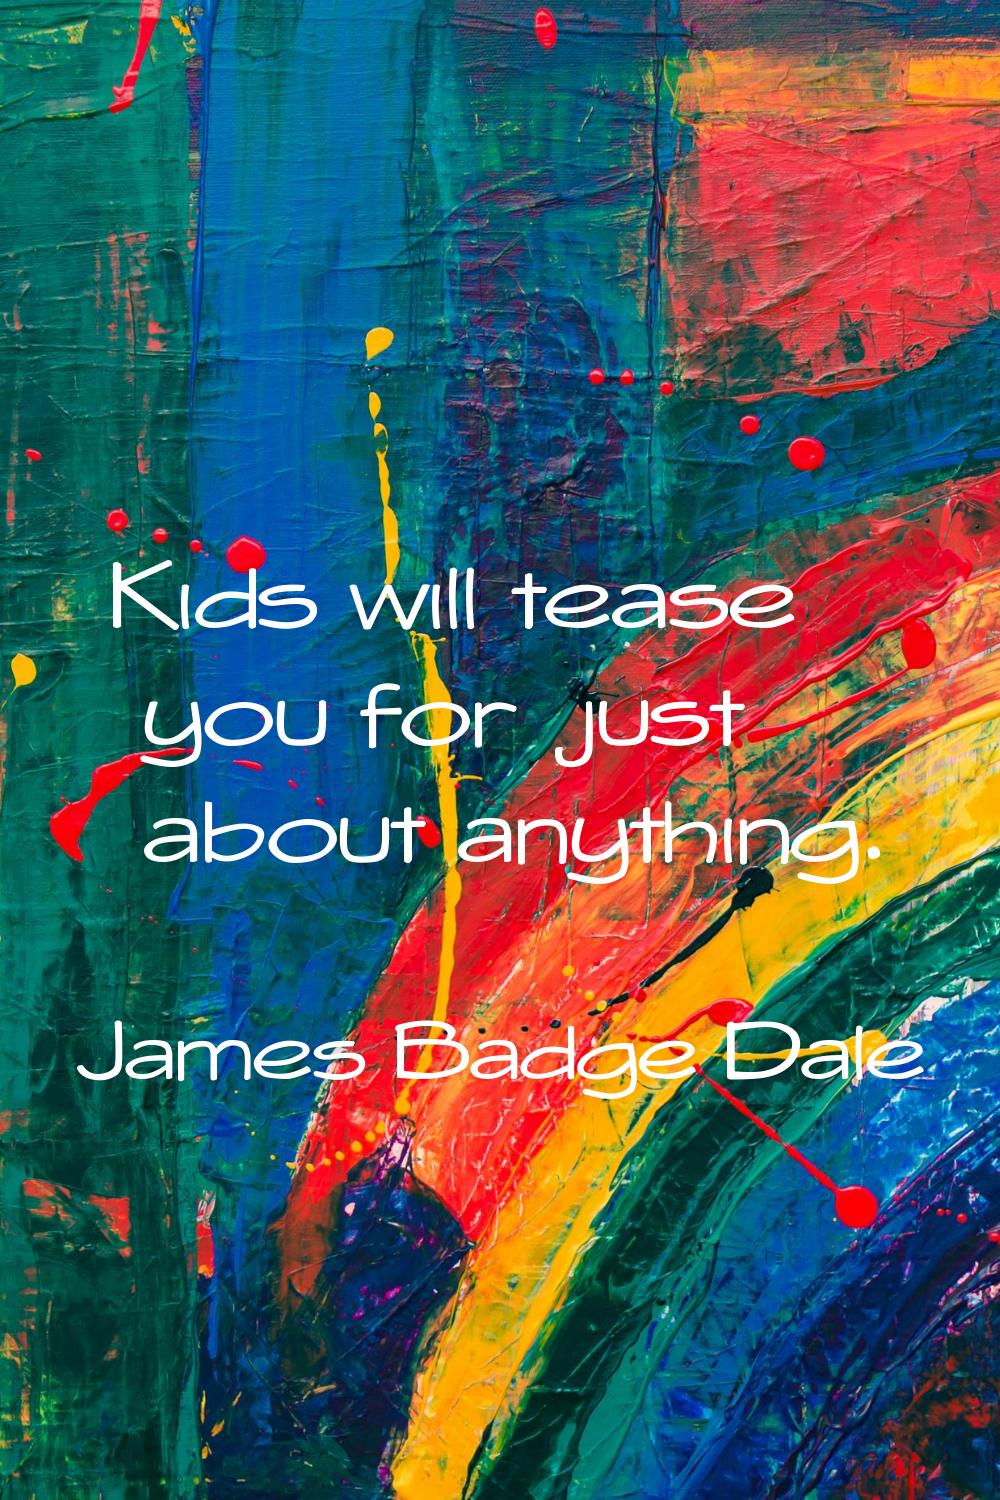 Kids will tease you for just about anything.